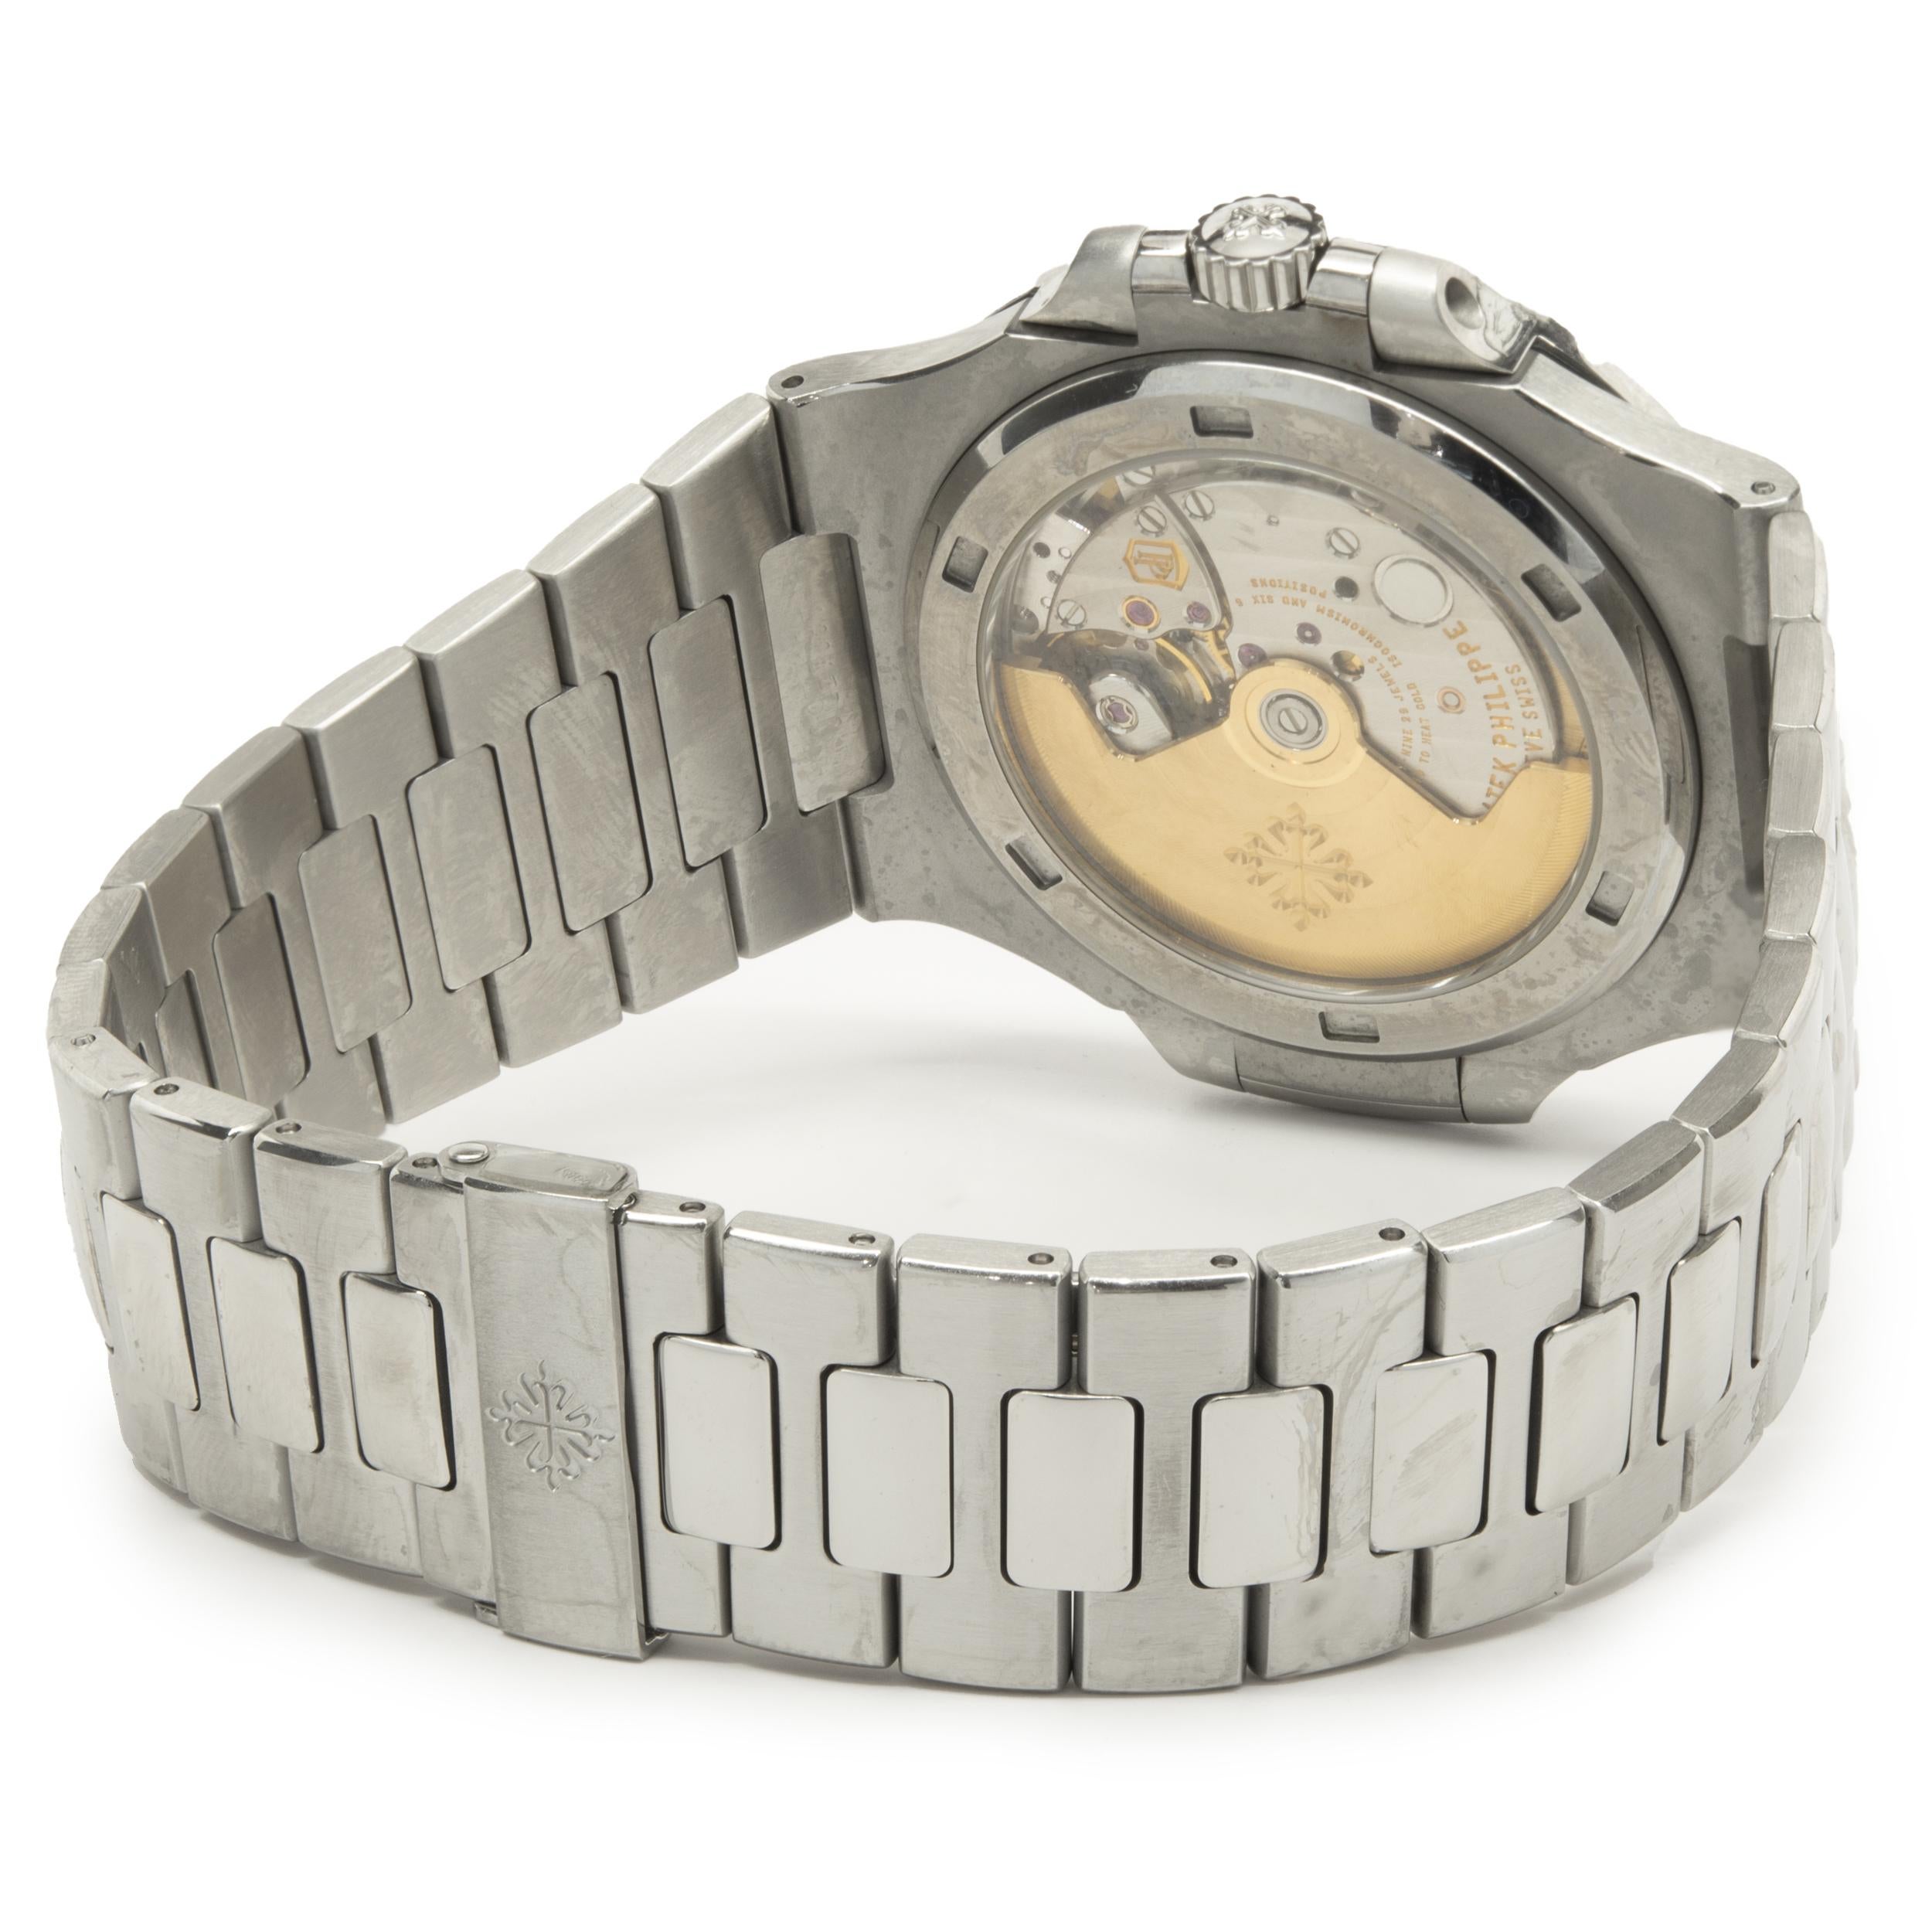 Patek Philippe Stainless Steel Nautilus In Excellent Condition For Sale In Scottsdale, AZ